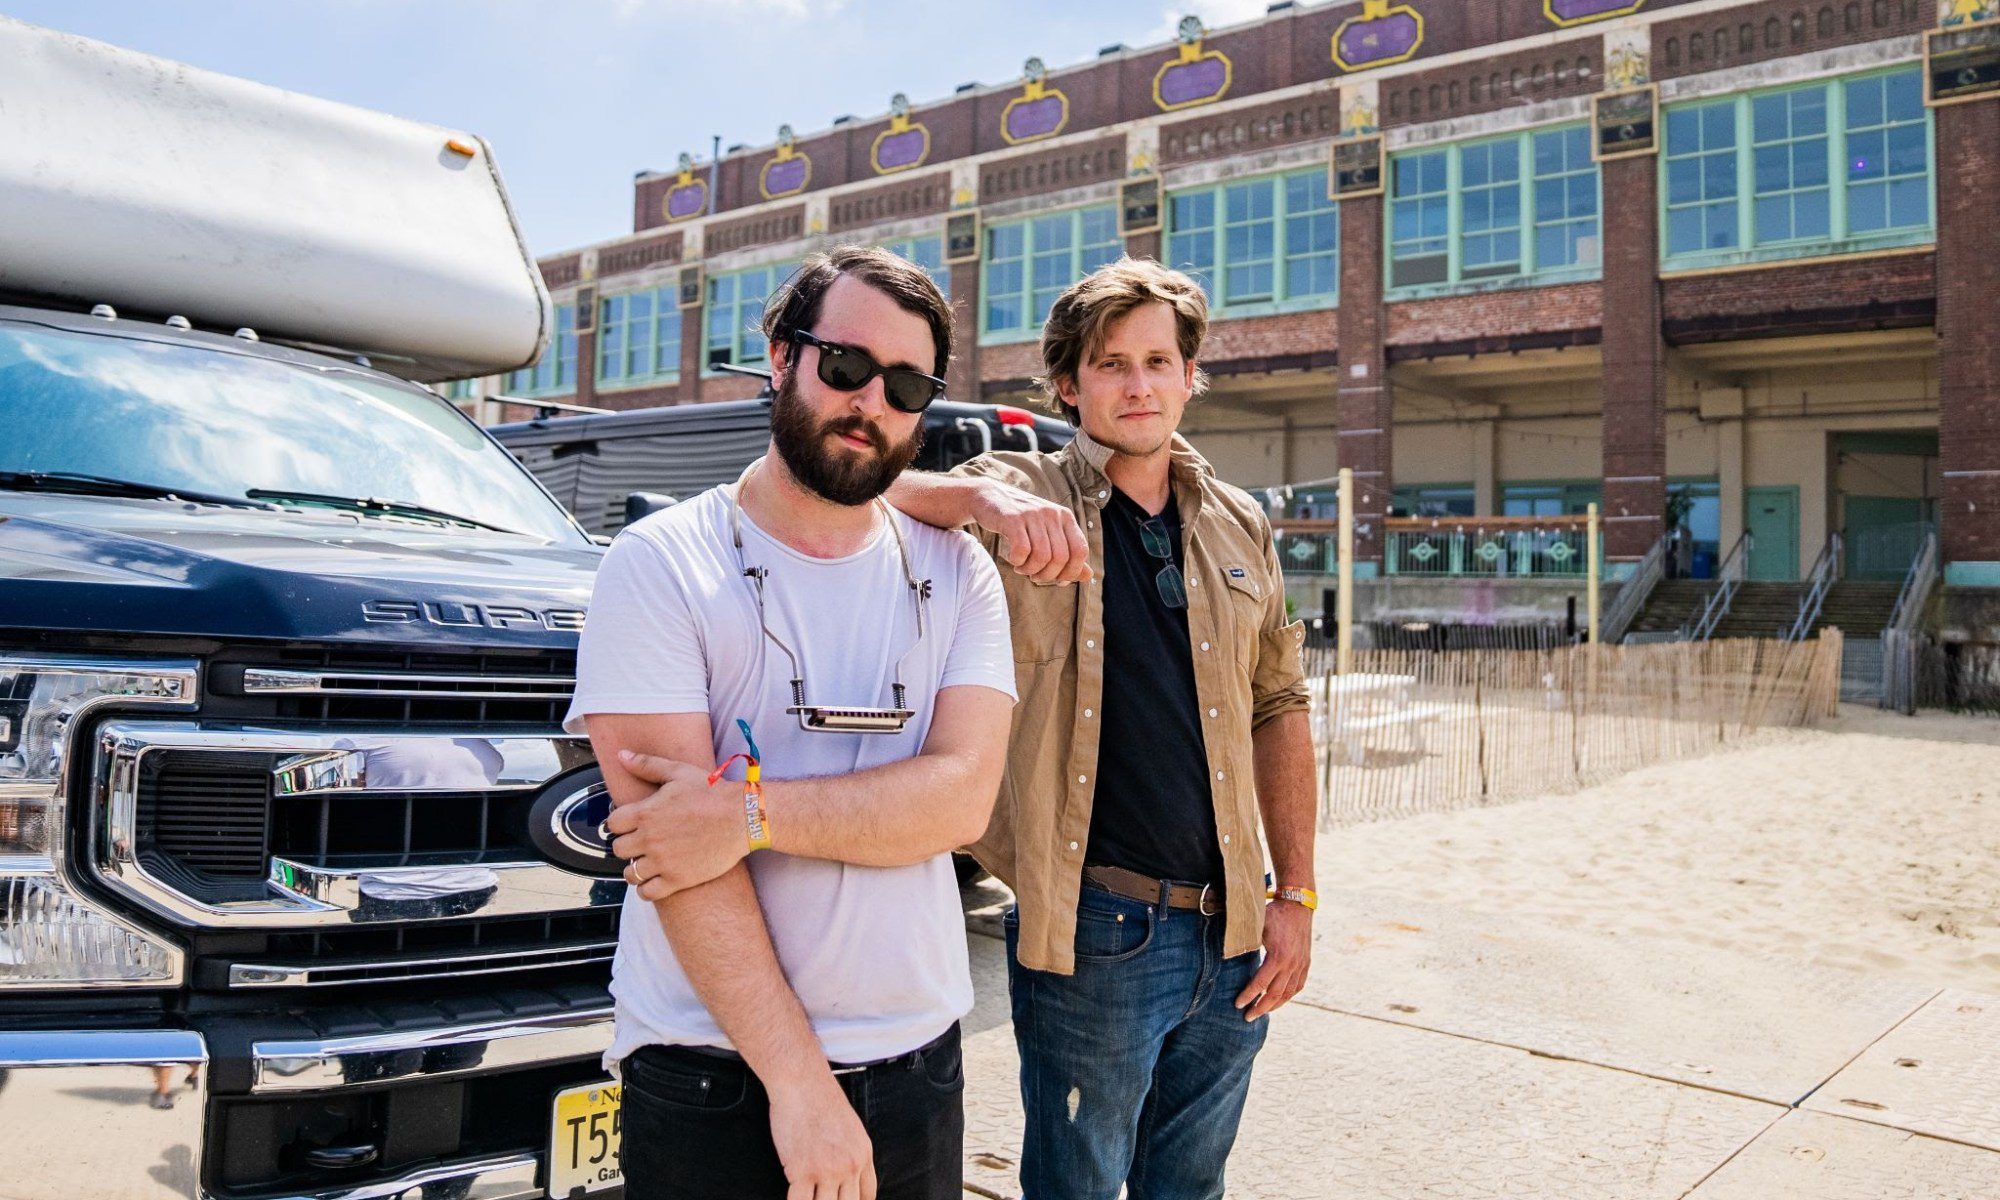 Joe Makoviecki and John Black of the folk band Jackson Pines lean on the front of a pickup. A brick building is in the background.